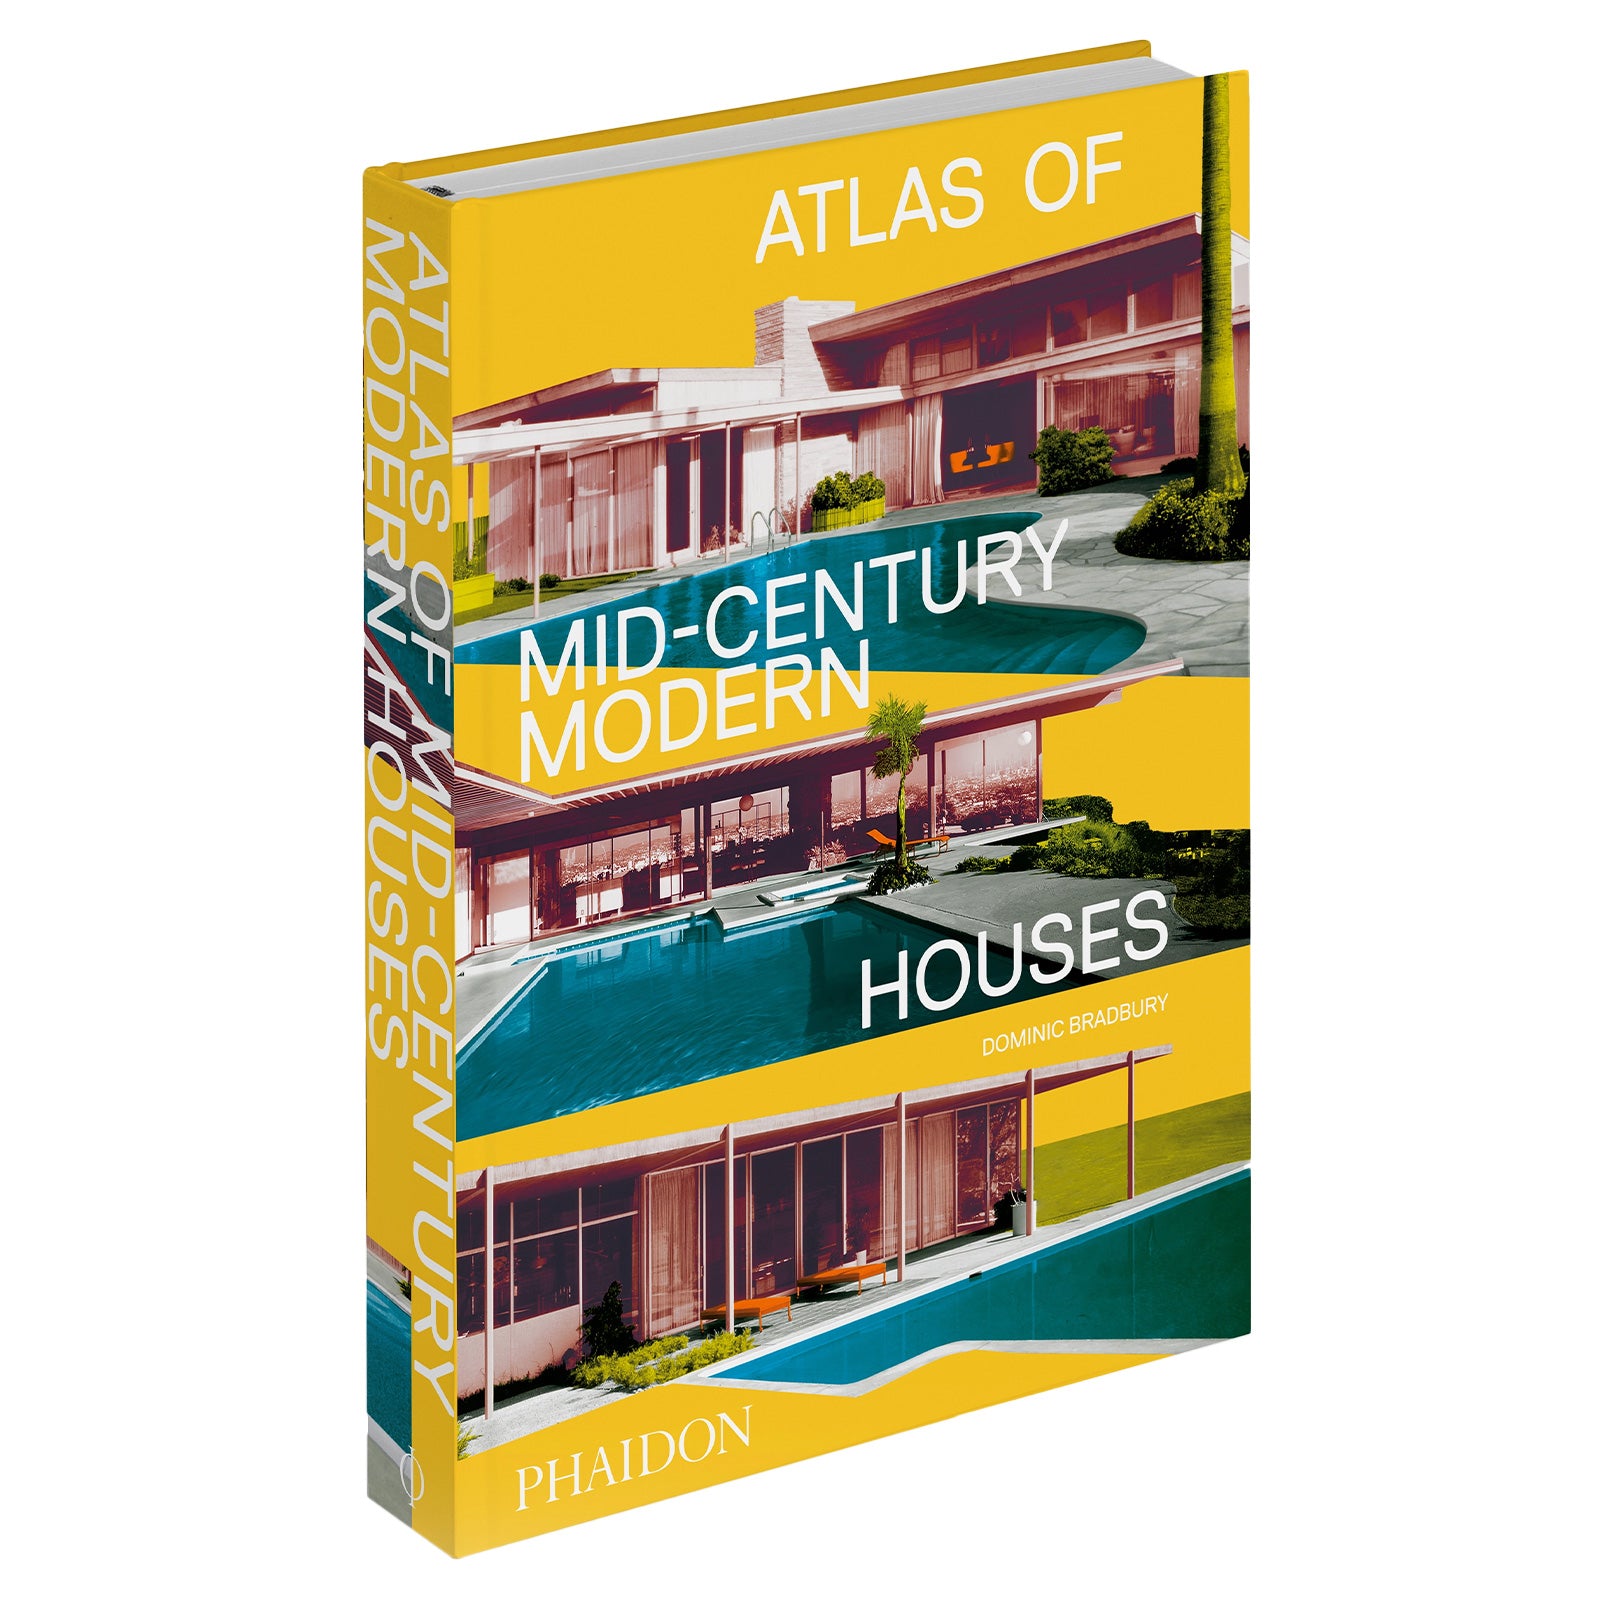 Atlas of Mid-Century Modern Houses' book cover.